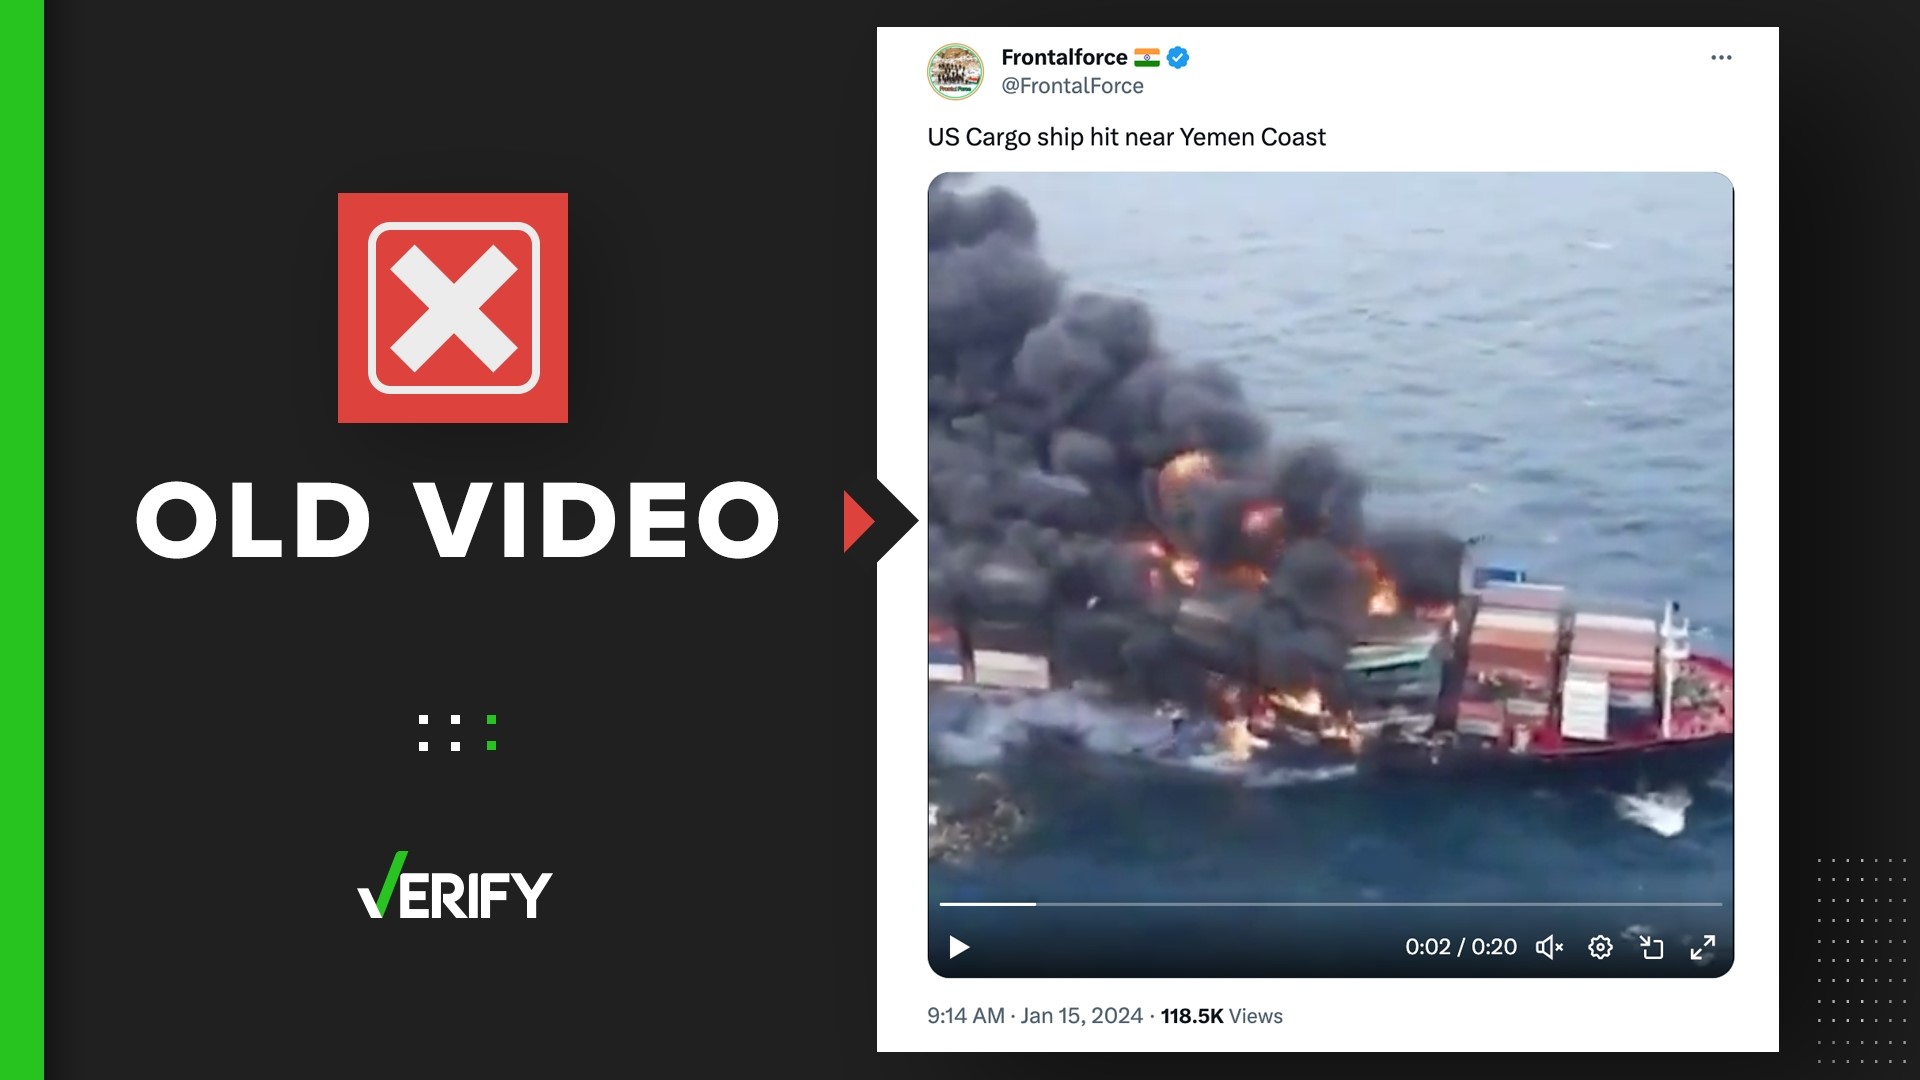 Online posts claim a video shows the aftermath of a Jan. 15 Houthi missile strike on a U.S. ship. The video was actually taken in Sri Lanka in 2021.